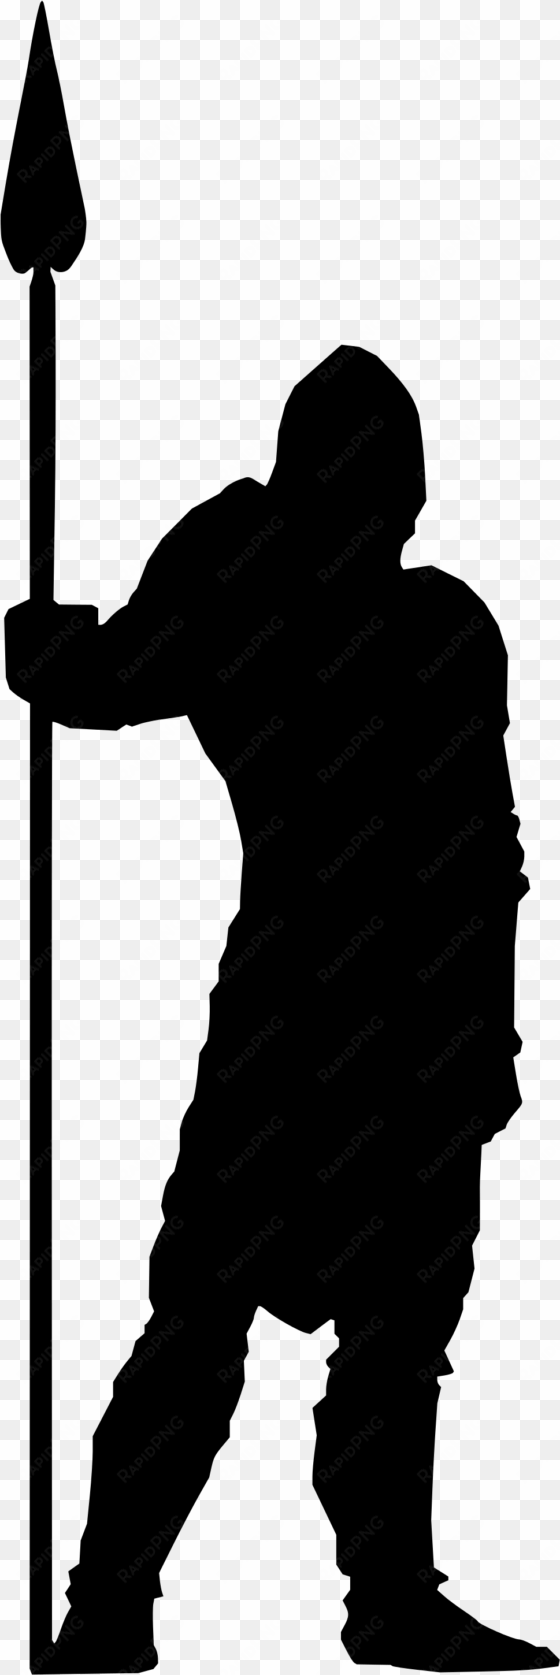 silhouette at getdrawings com free for personal - medieval soldier silhouette png